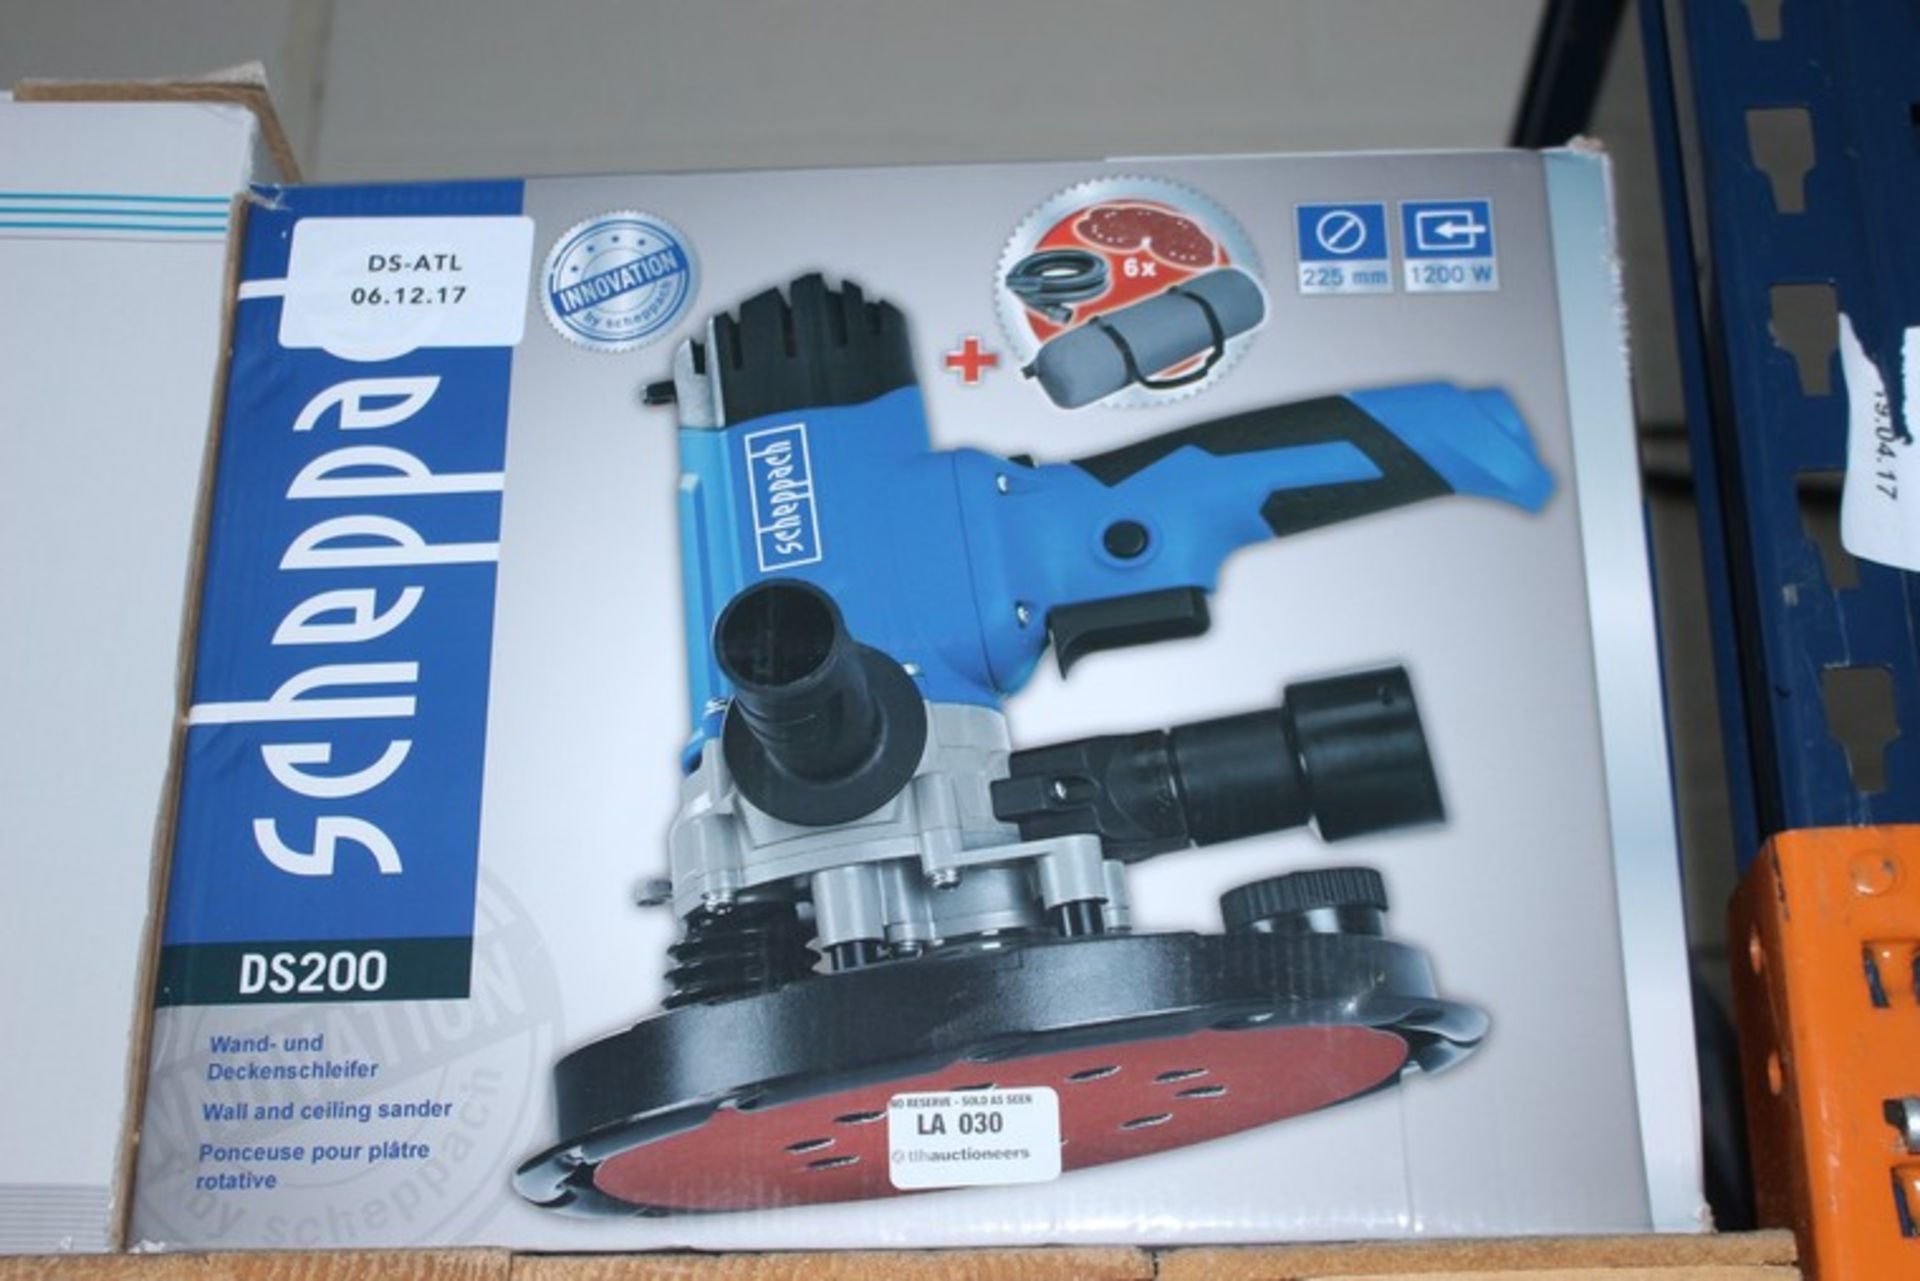 1 x BOXED ELECTRIC SANDER (06/12/17) *PLEASE NOTE THAT THE BID PRICE IS MULTIPLIED BY THE NUMBER